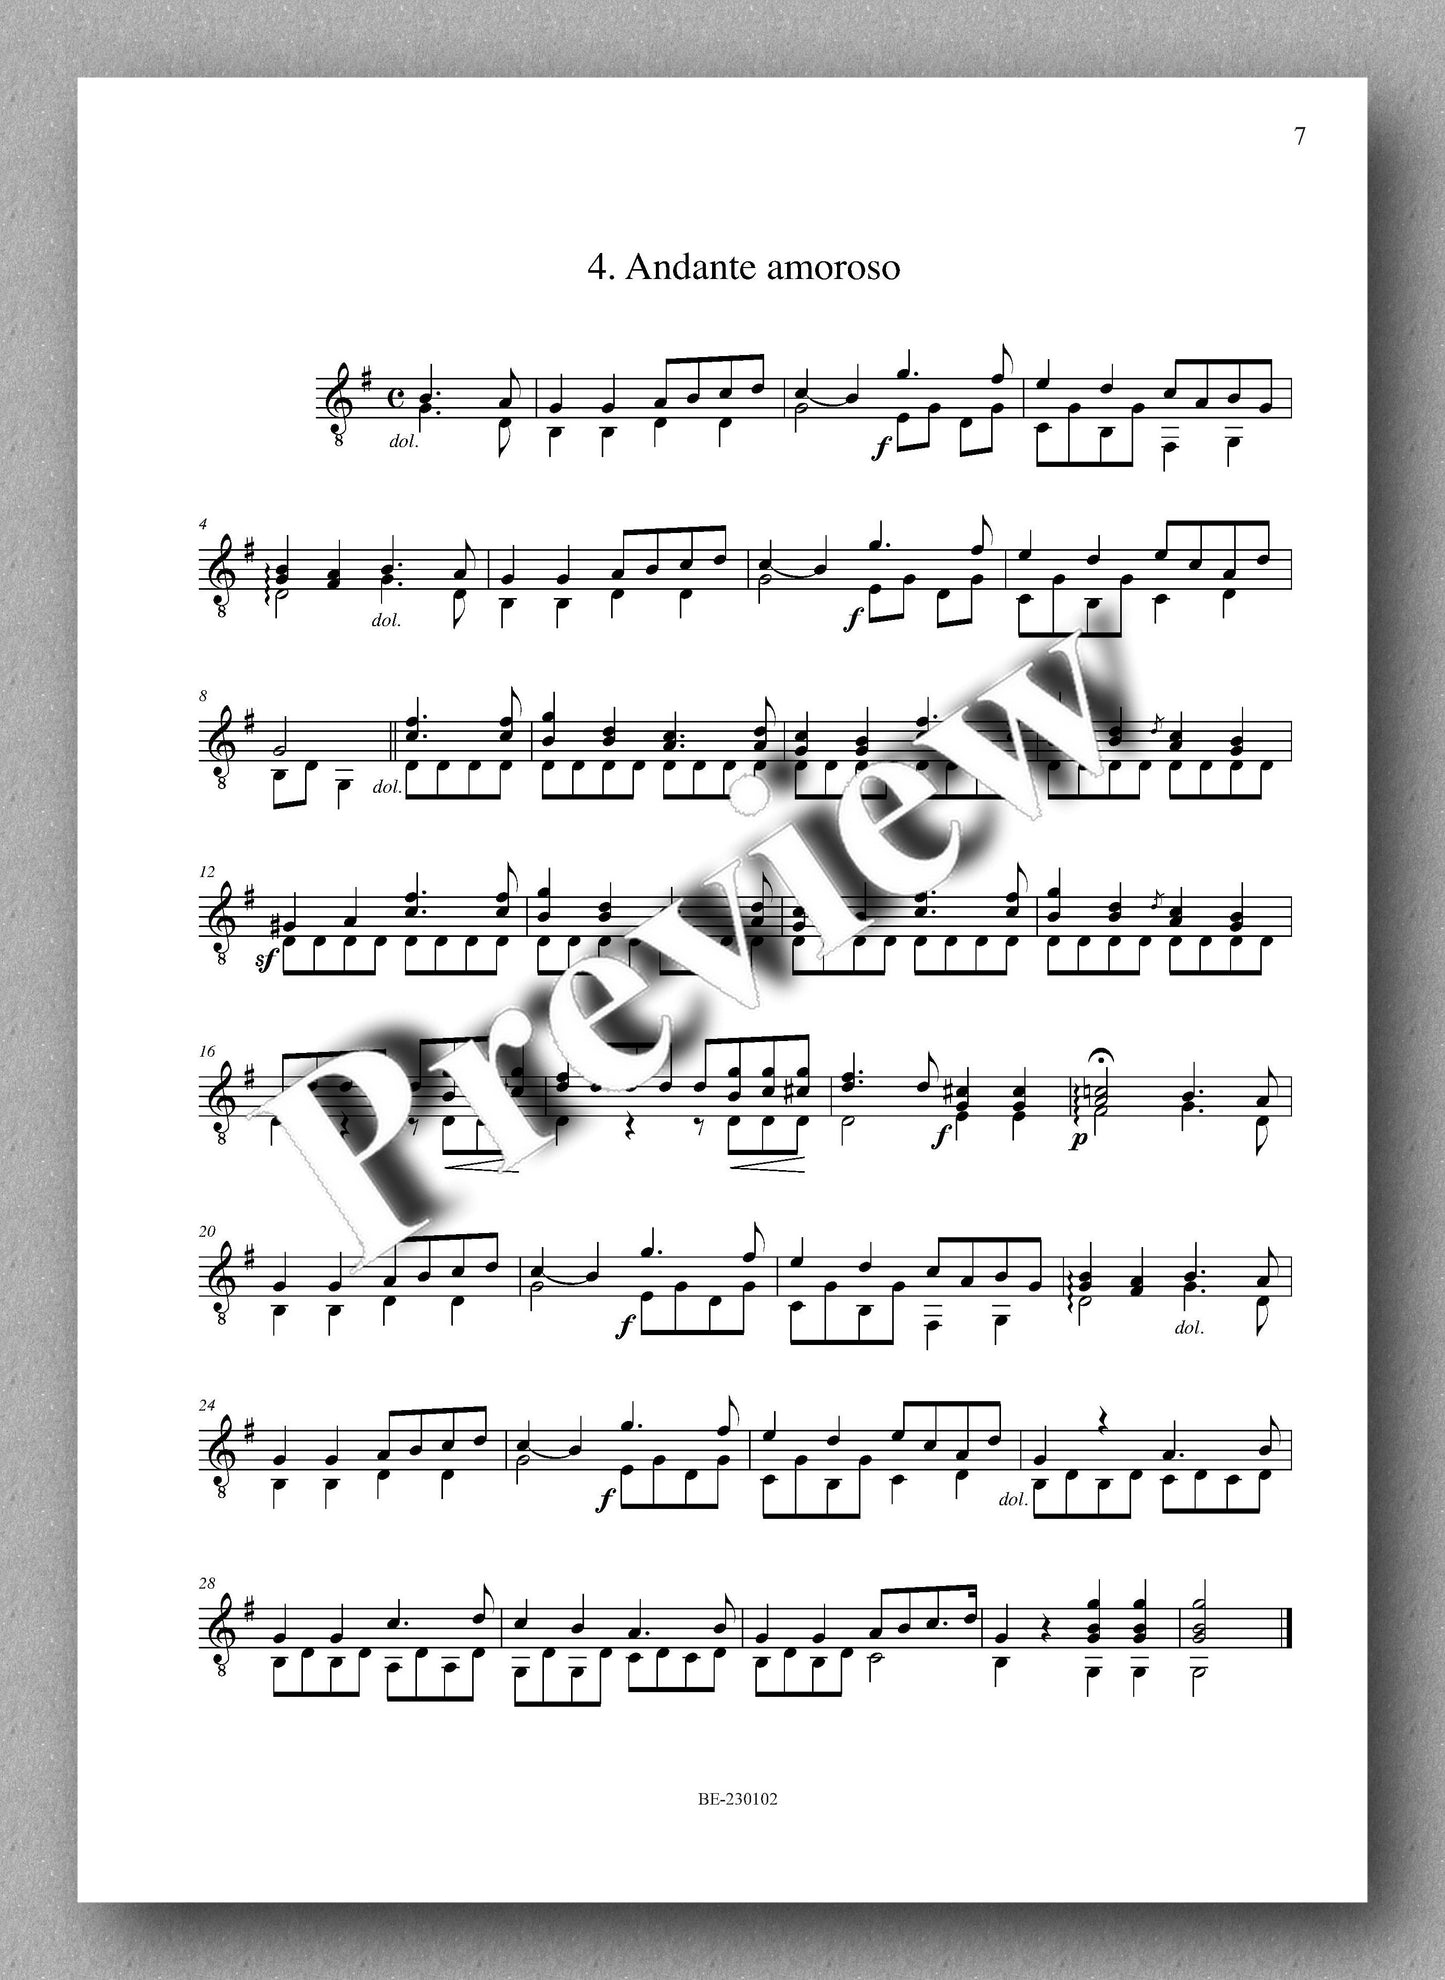 Molino, Collected Works for Guitar Solo, Vol. 14 - Preview of the music score 2